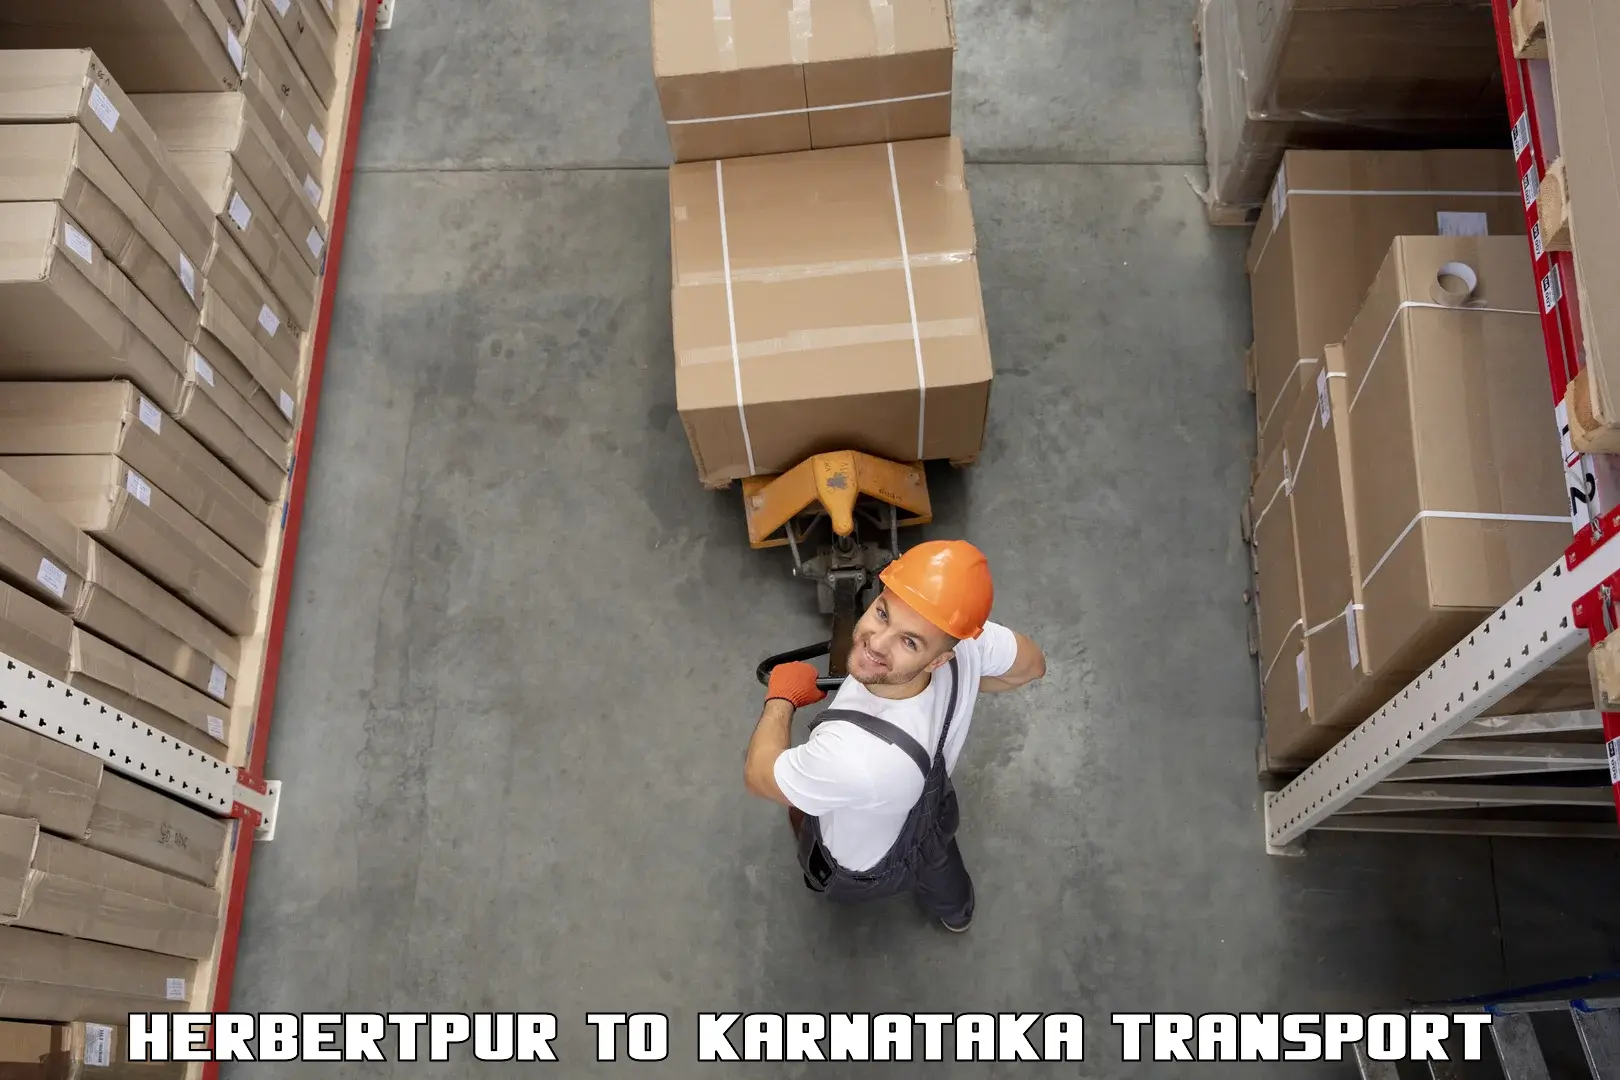 Part load transport service in India Herbertpur to Devanahalli